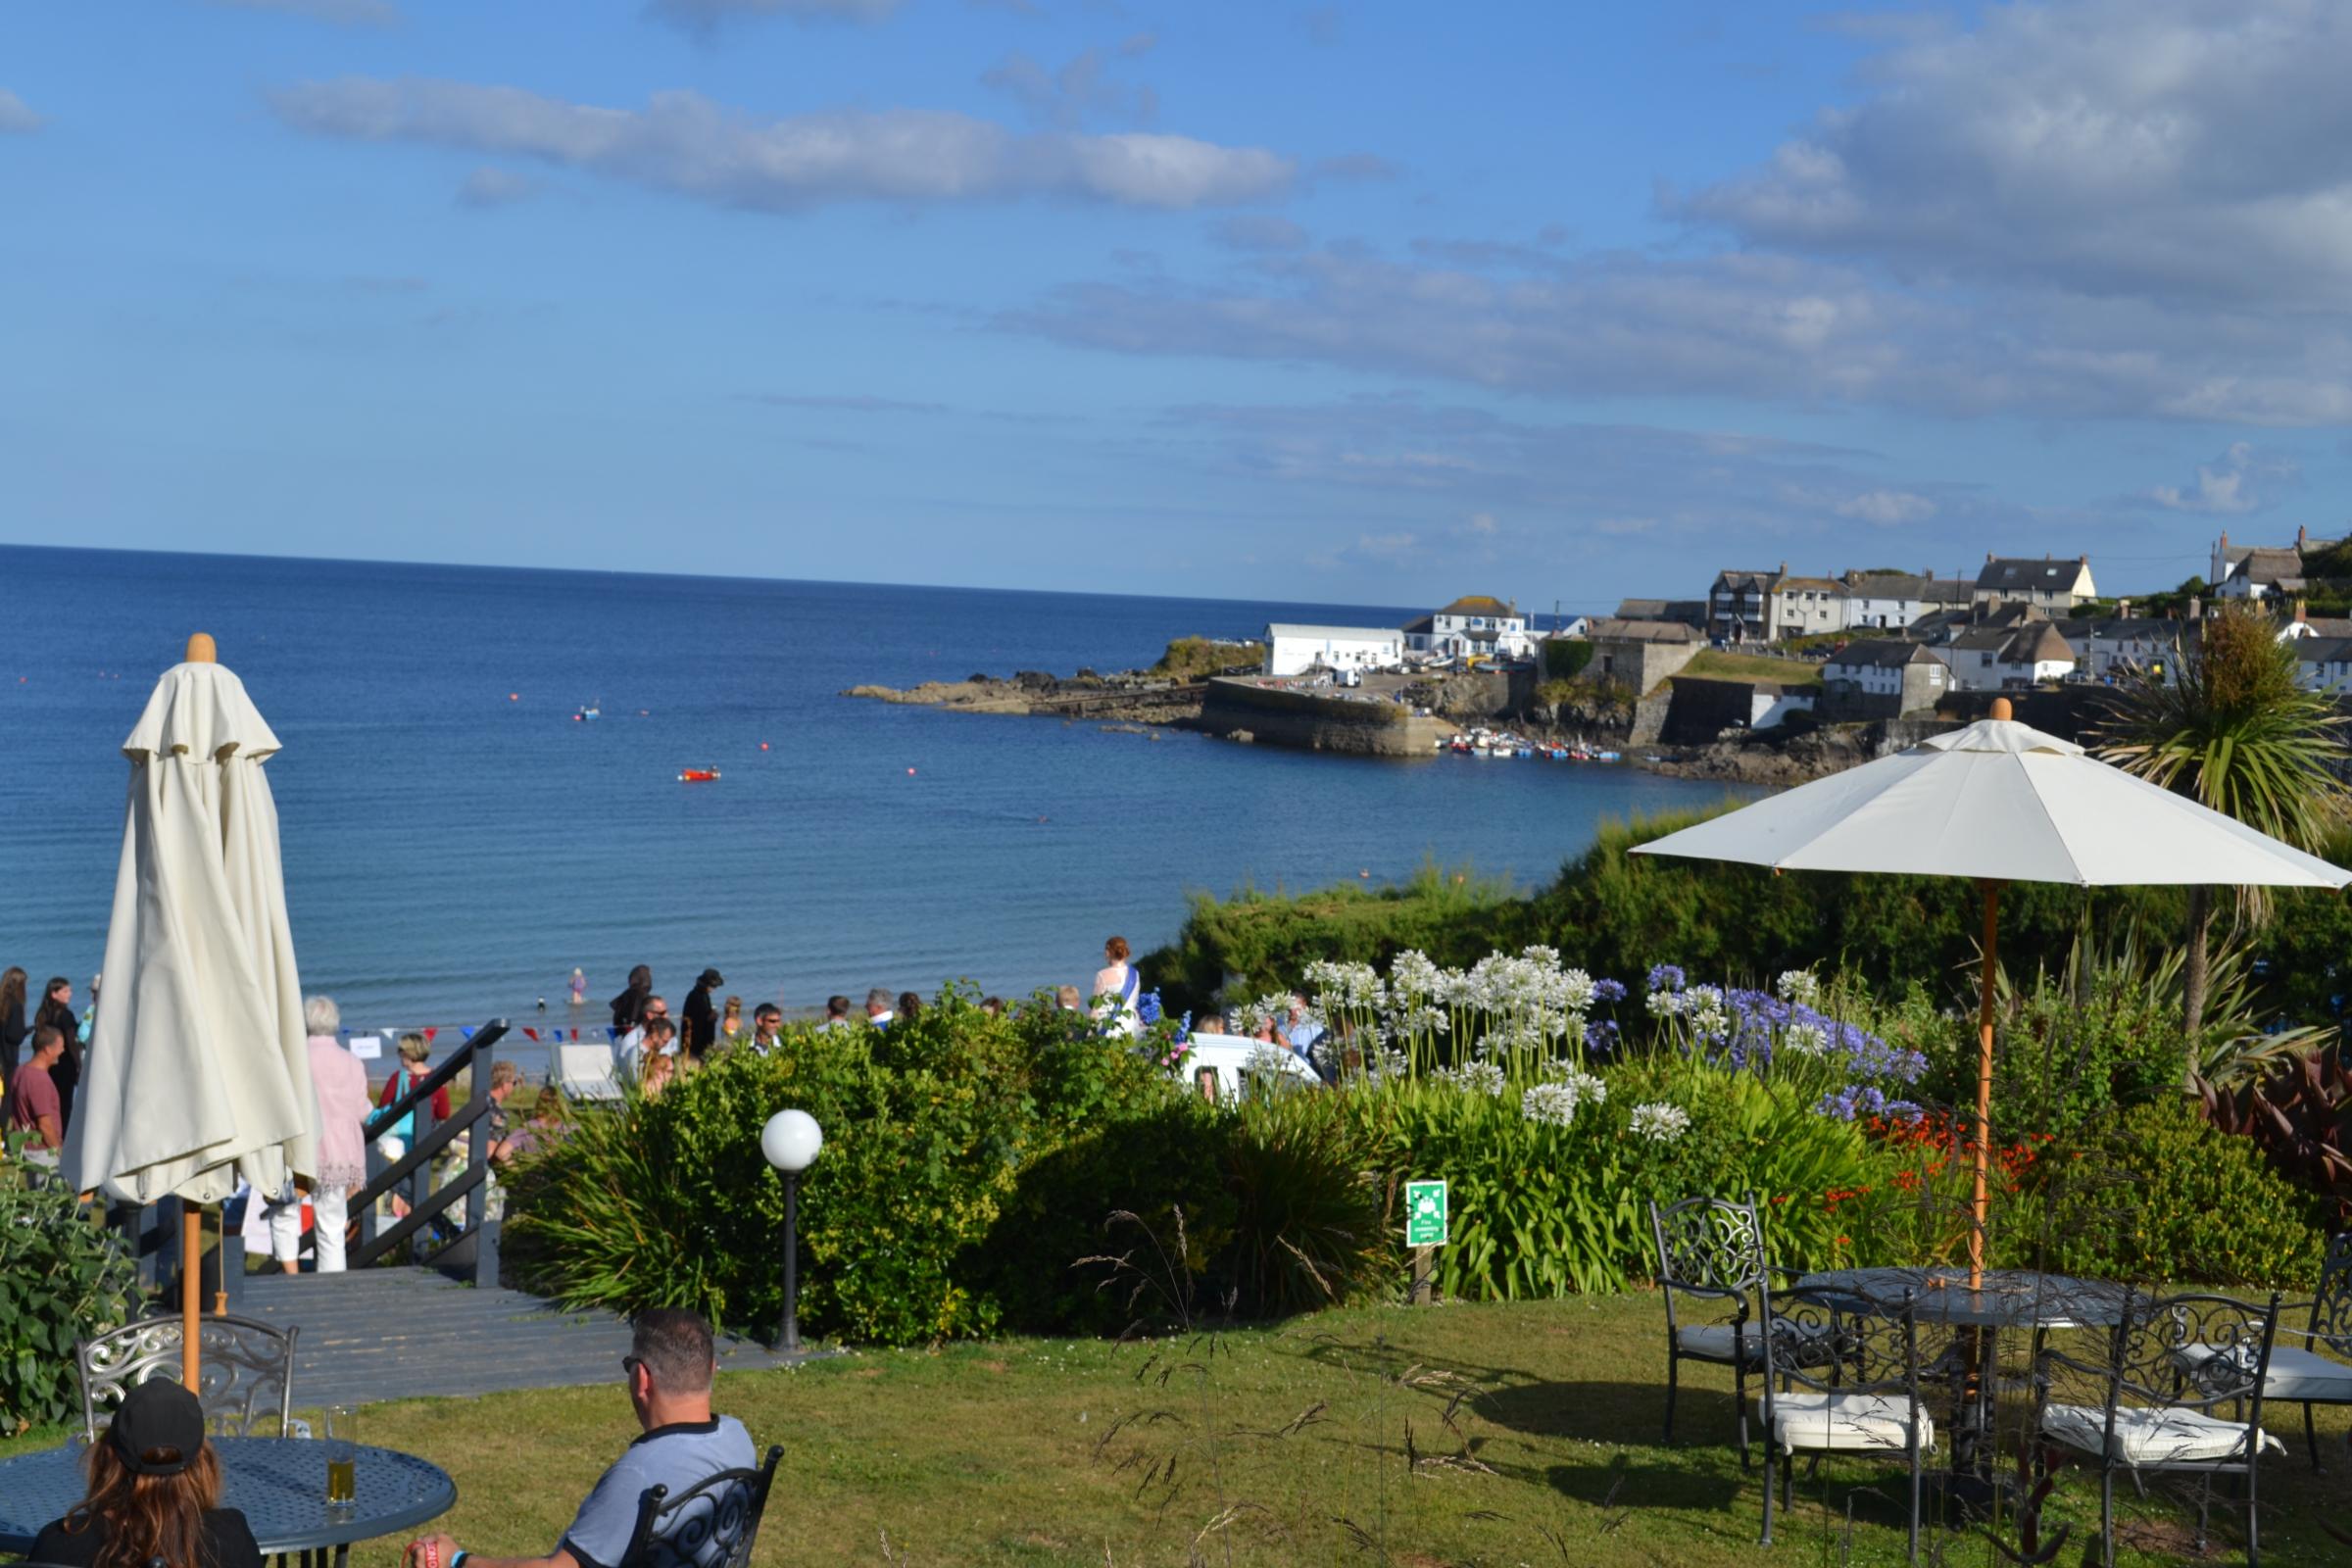 The Bay Hotel, Coverack.